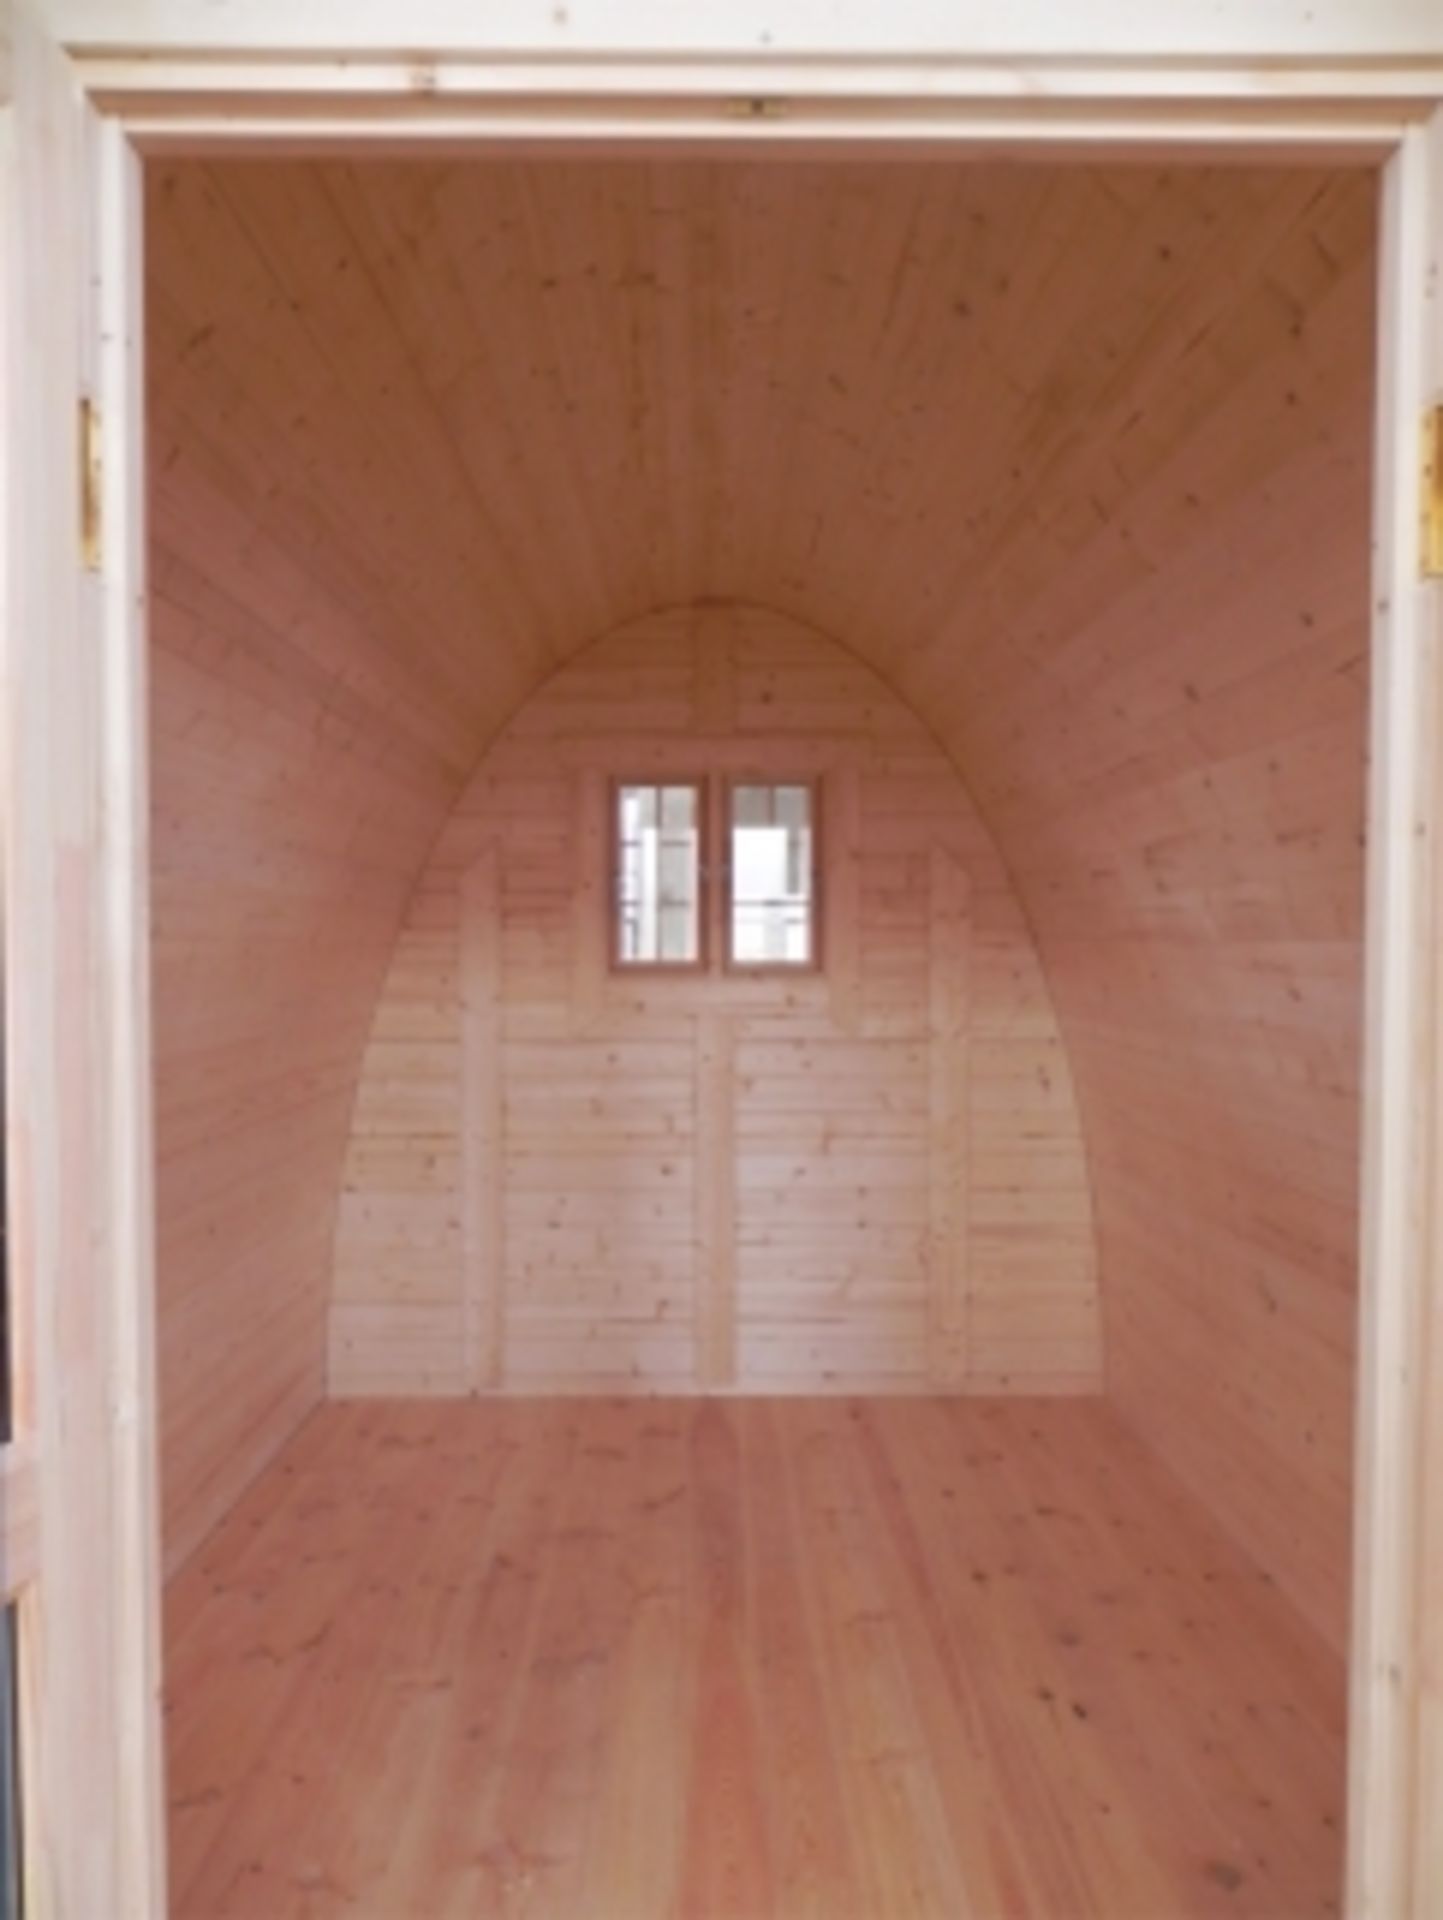 V Brand New 4 x 2.4m Camping Pod Made from Spruce - Double doors with Lock and Double Glass - Image 3 of 4